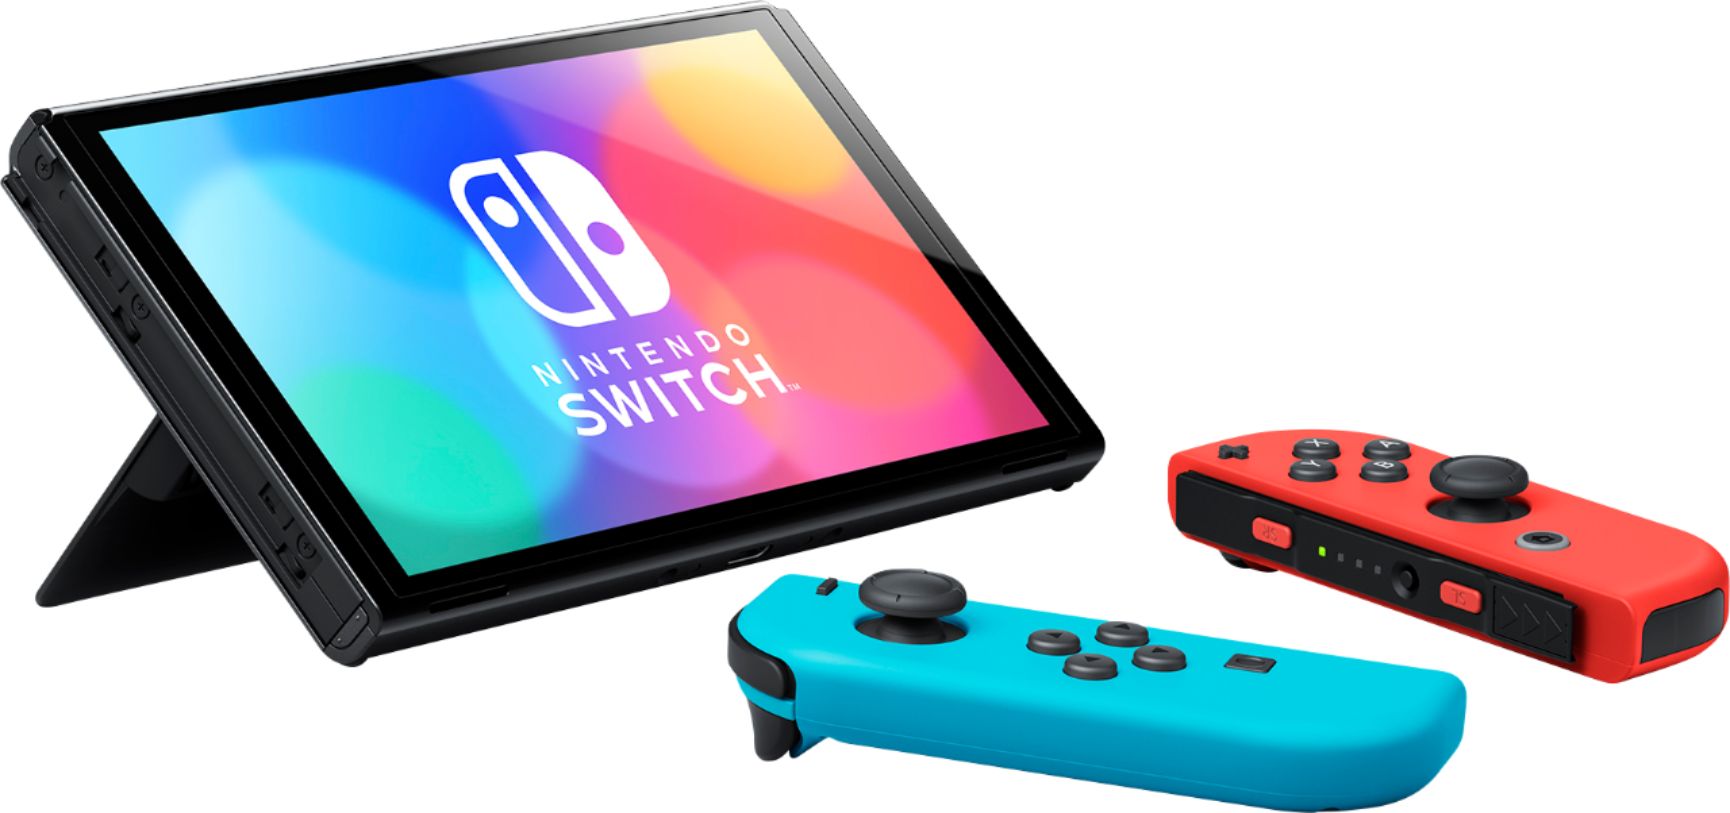 2022 New Nintendo Switch OLED Model Neon Red & Blue Joy Con 64GB Console HD Screen & LAN-Port Dock with Super Bomberman R, Mytrix Wireless Switch Pro Controller and Accessories